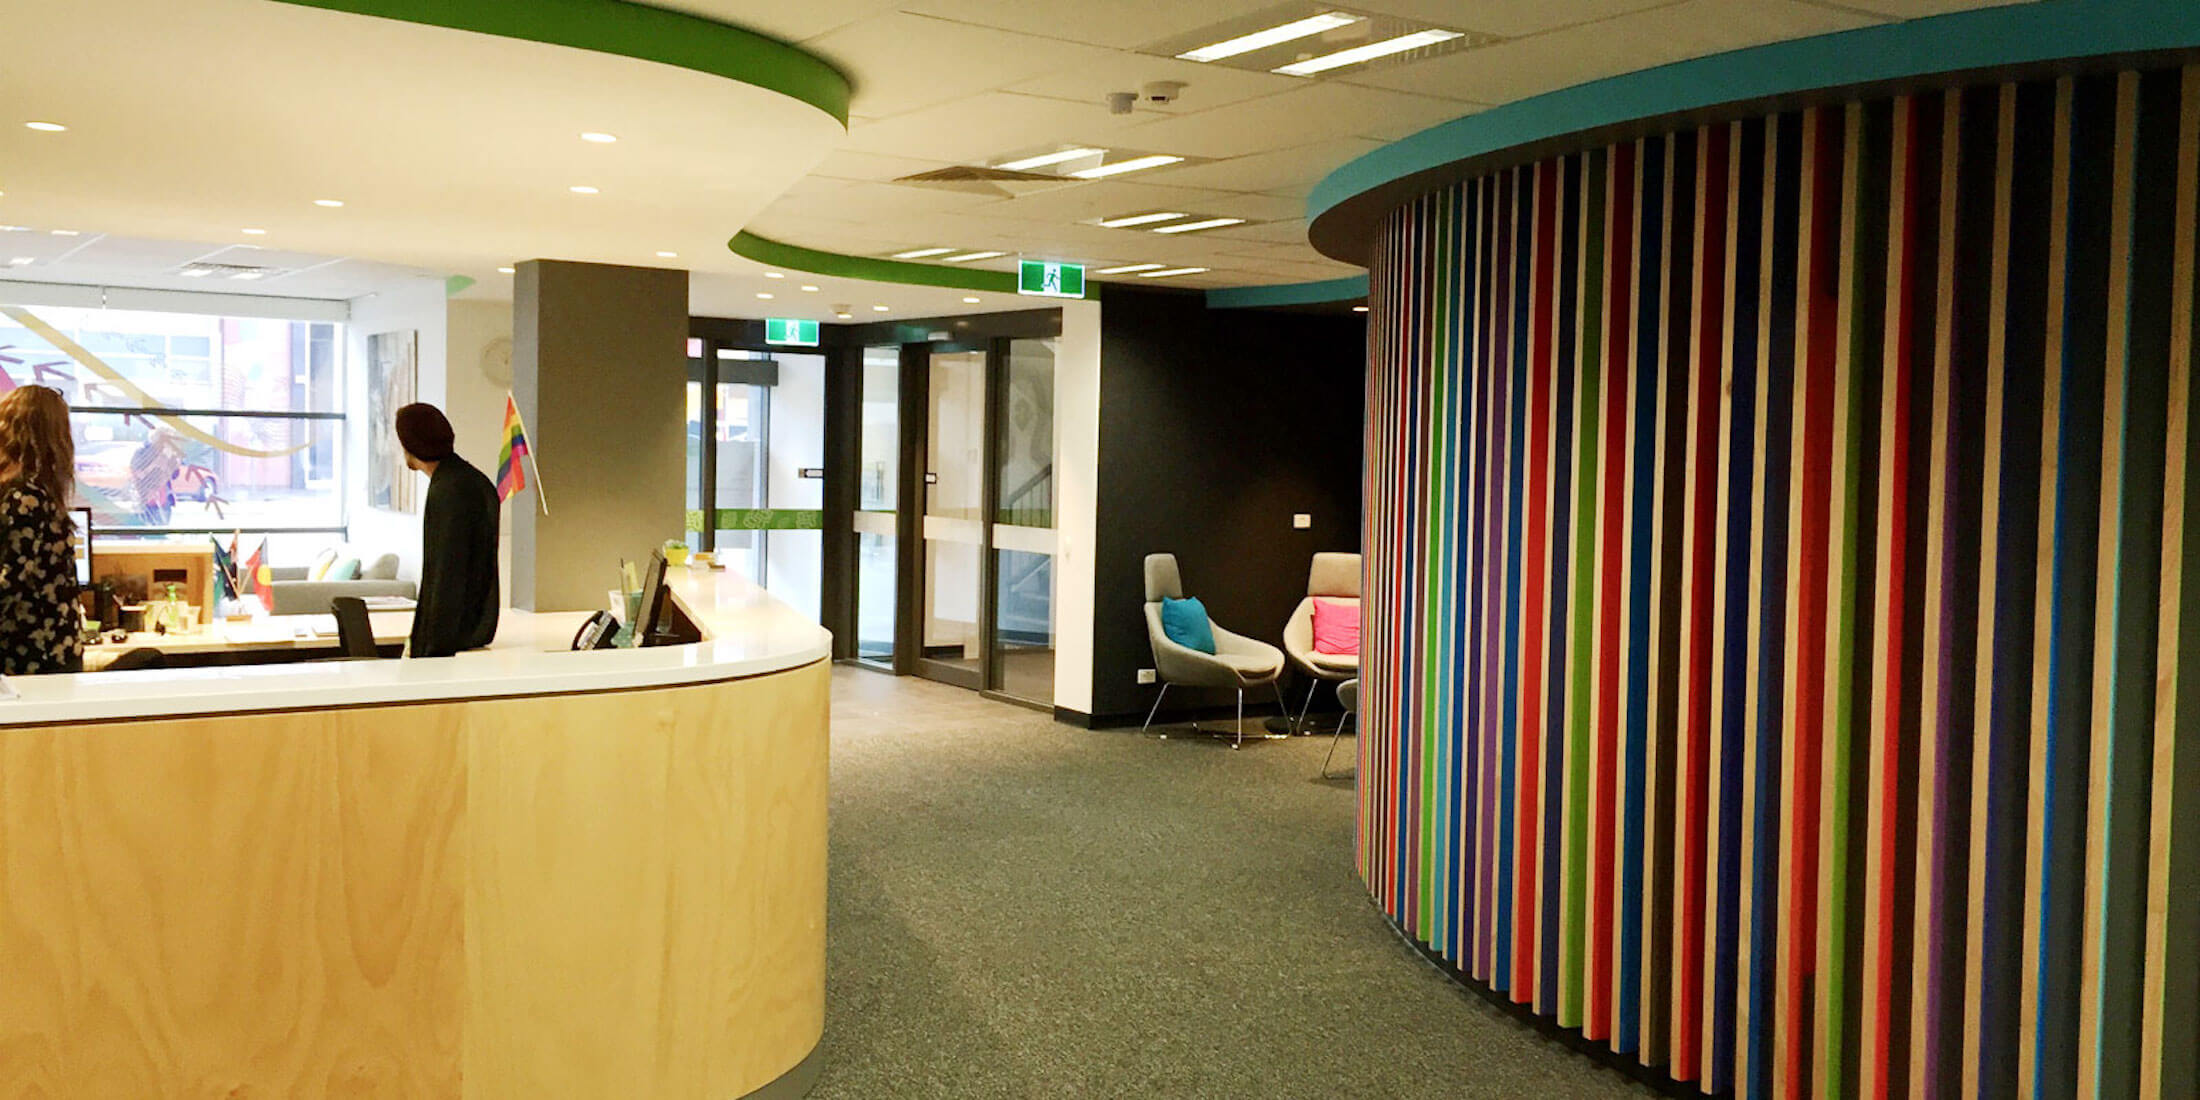 Rainbow coloured ribbed detail on wall screening a waiting area, reception desk to the left